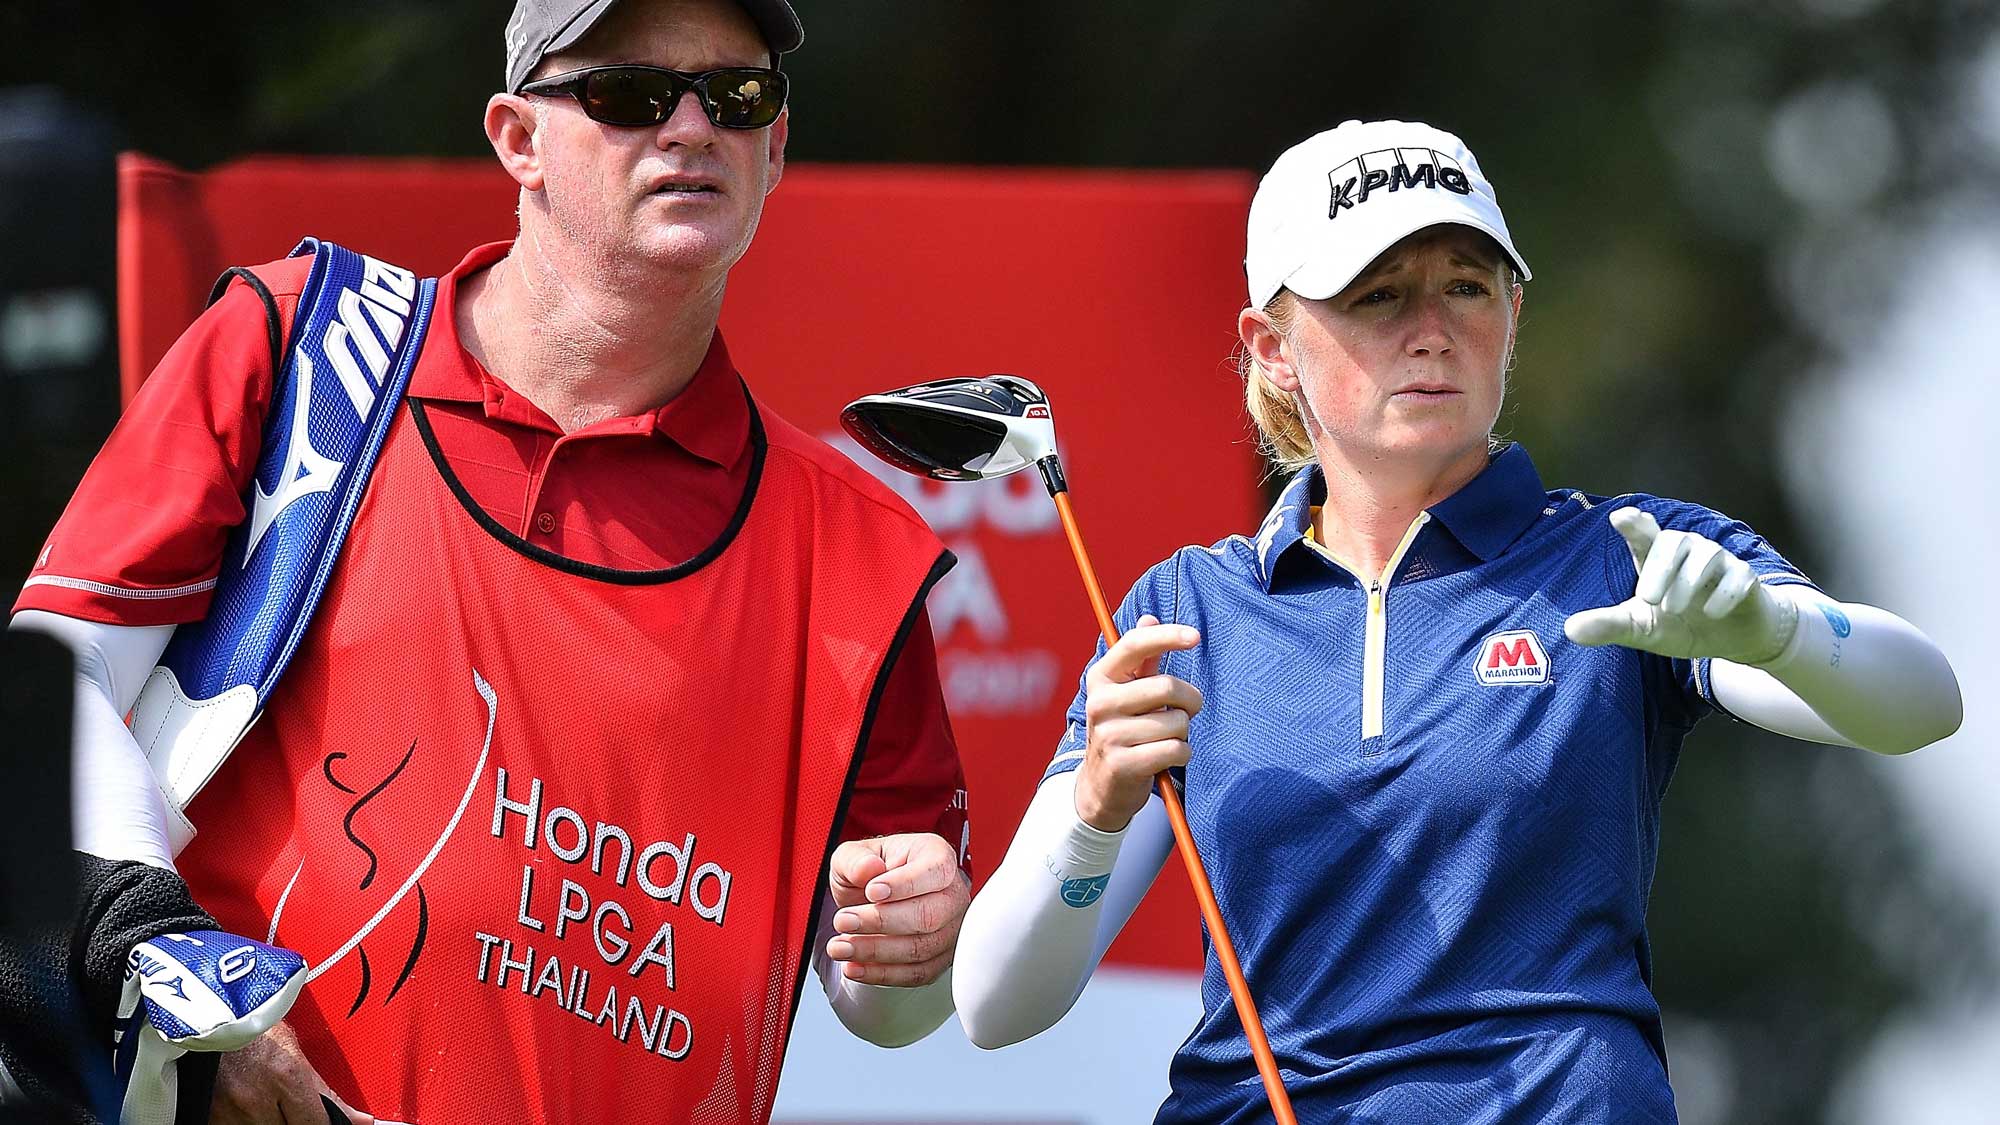 Stacy Lewis of United States talks with her caddy during the Honda LPGA Thailand